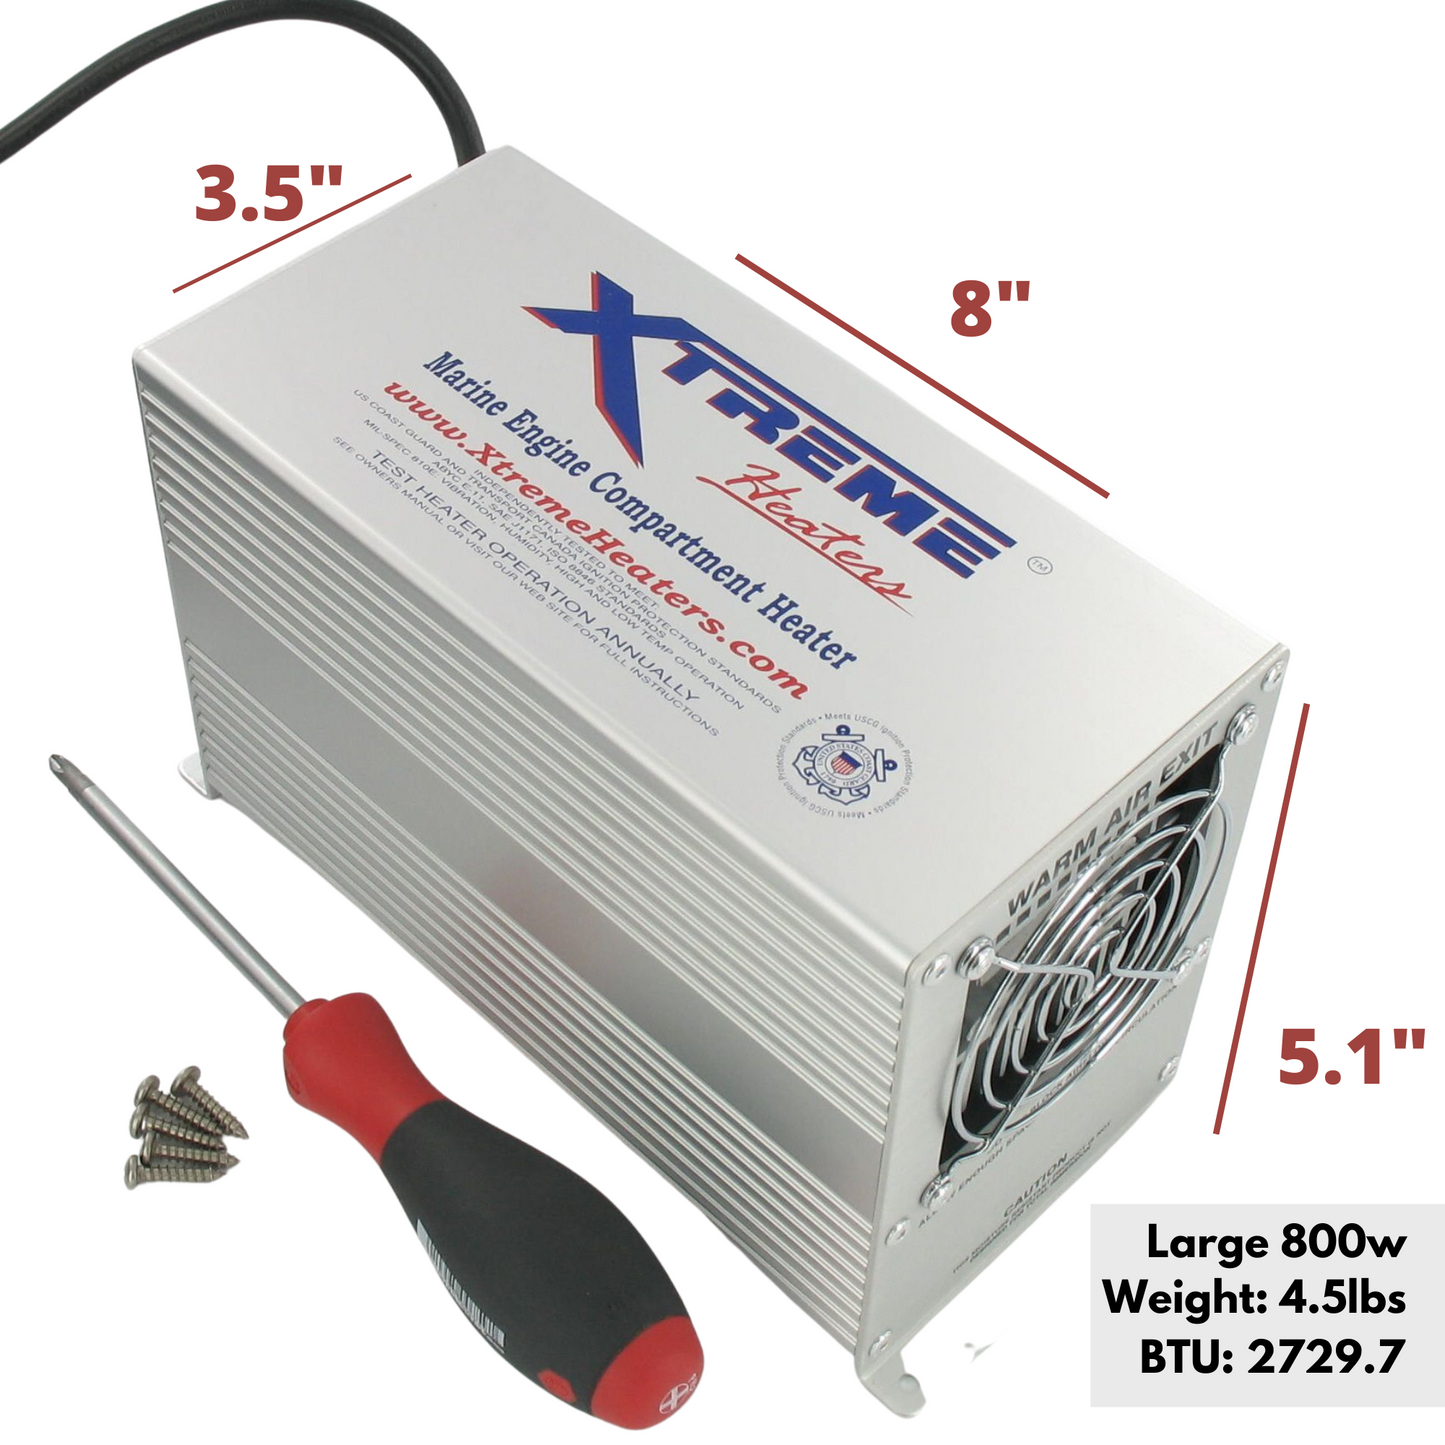 TWO Xtreme Heaters Large 800W XXXHEAT-Boat Bilge Heaters and RVs